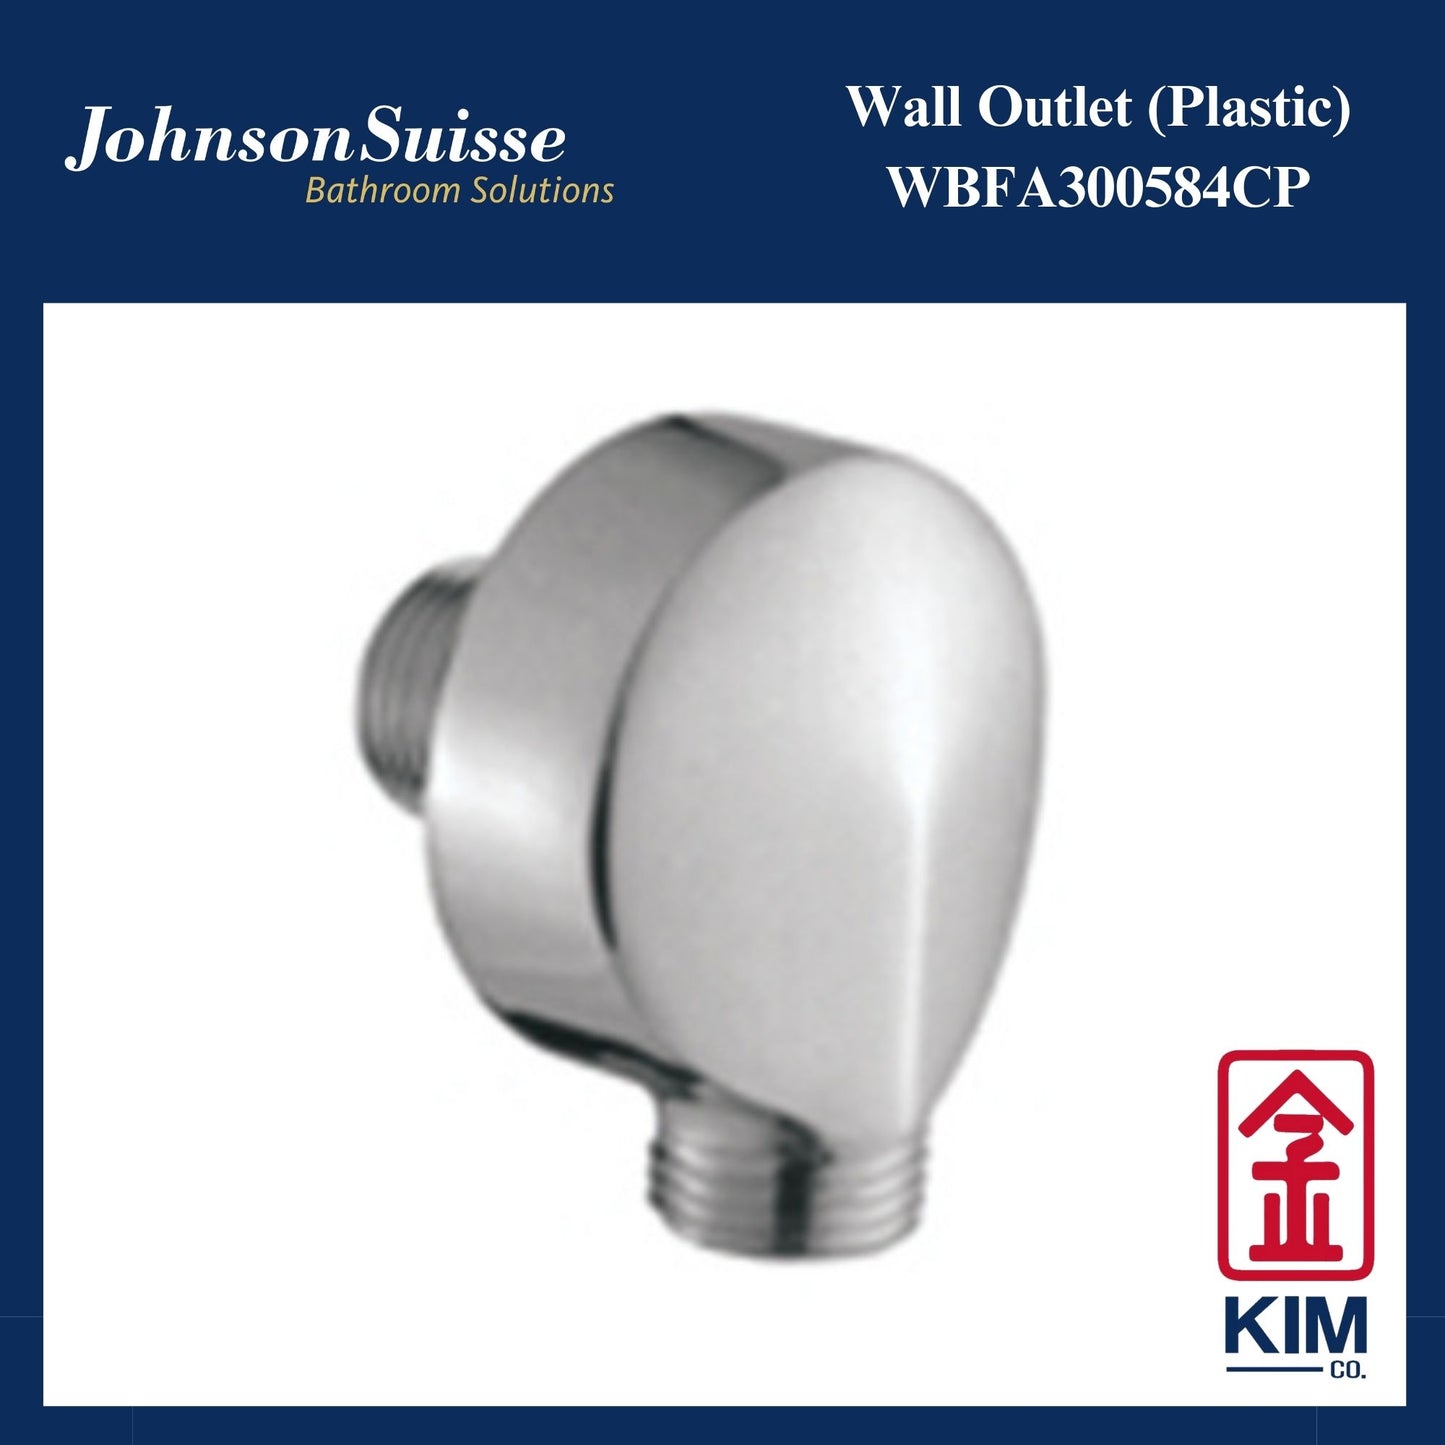 Johnson Suisse Wall Outlet (Plastic) (WBFA300584CP)